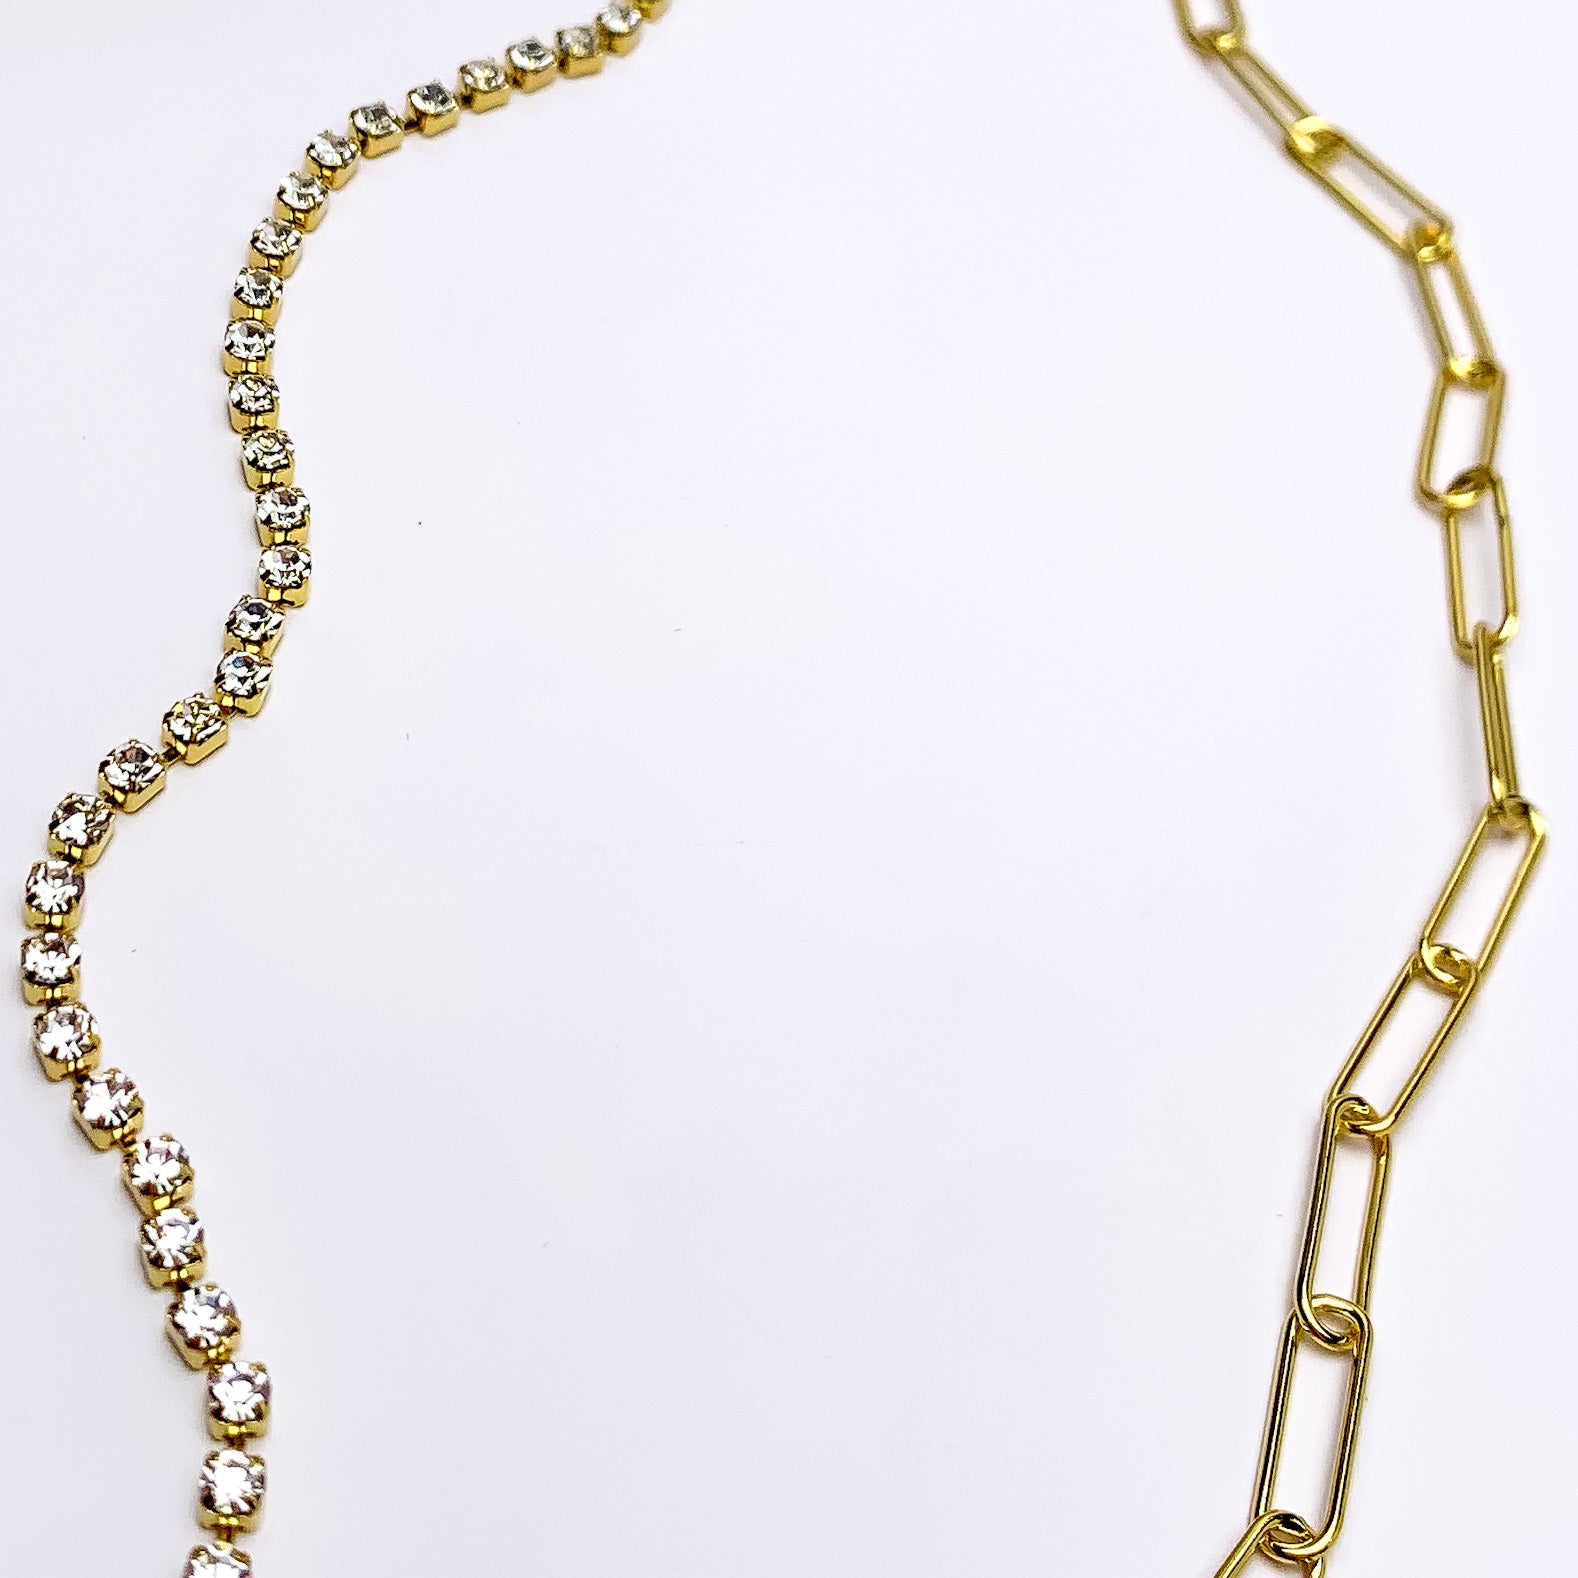 Gold Dipped Necklace Split With Clear Crystals and Chain - Giddy Up Glamour Boutique